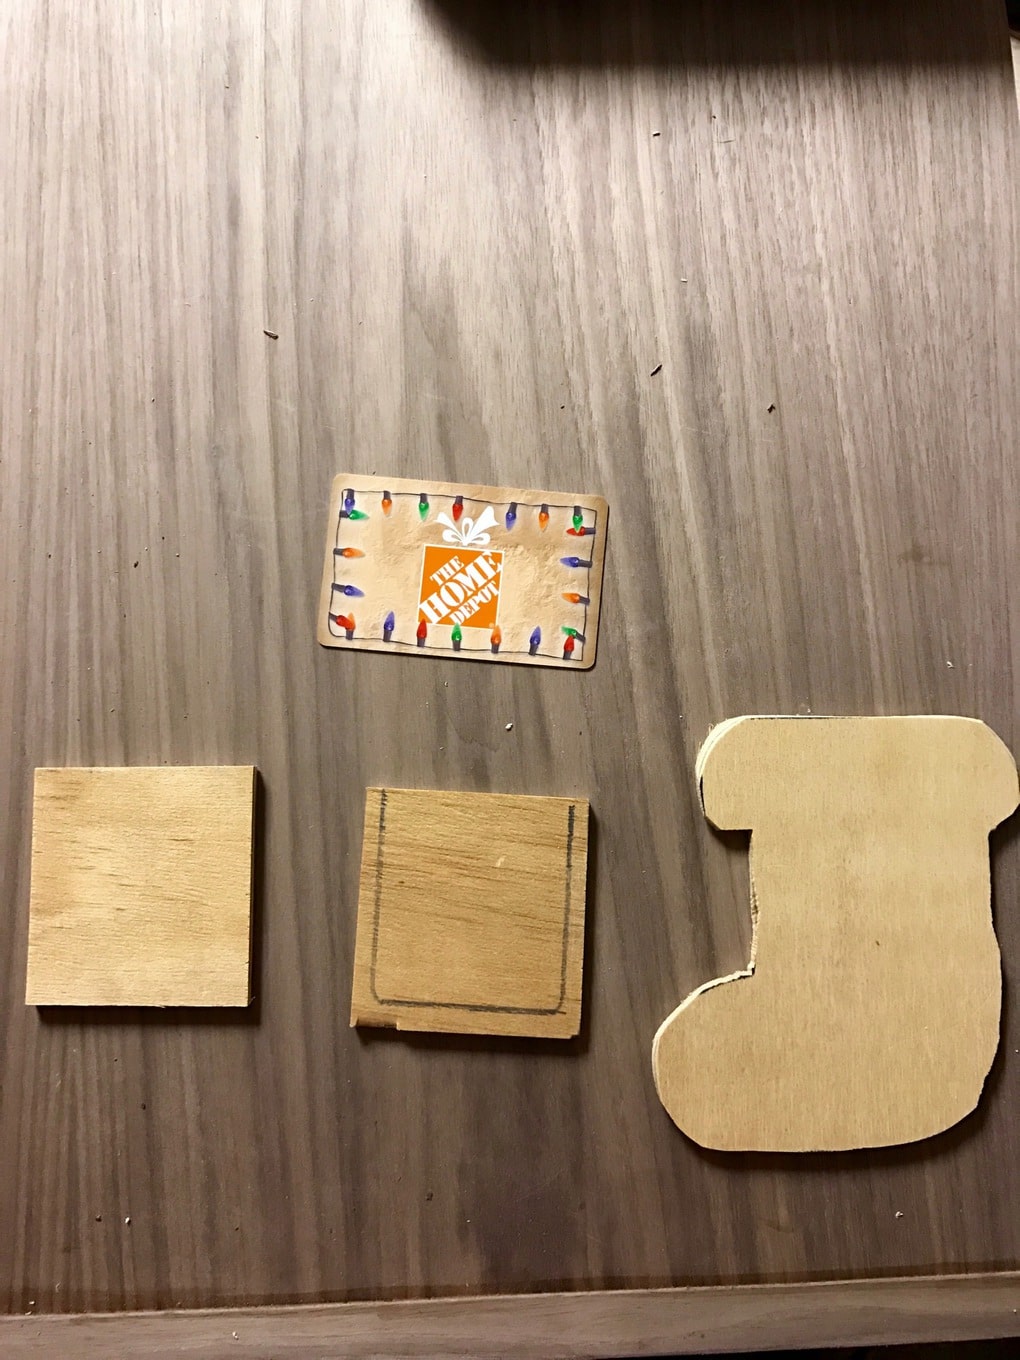 Need a unique and creative way to give a gift card? These wooden stocking gift card holders are so cute and so simple to make! This is the perfect gift idea for anyone on your list. 